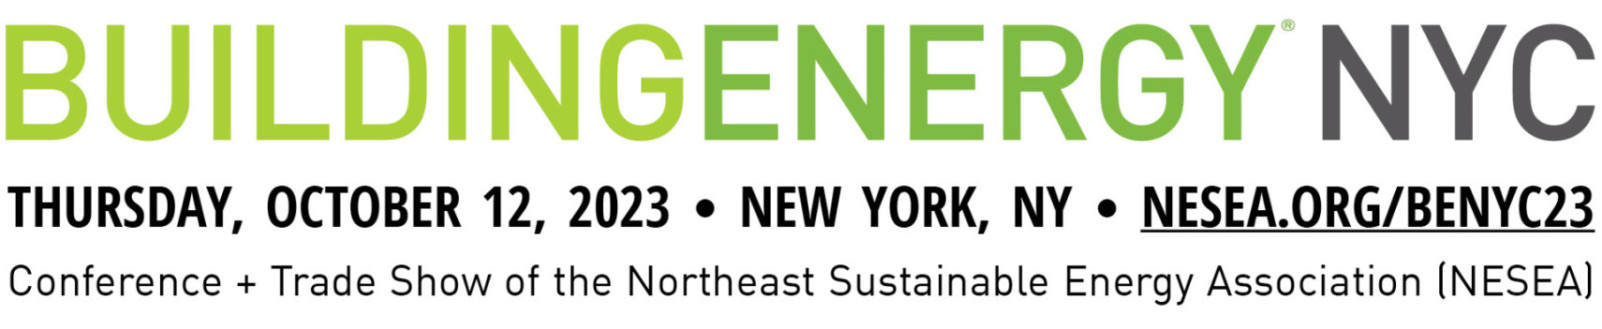 BuildingEnergy NYC Conference Info and Logo